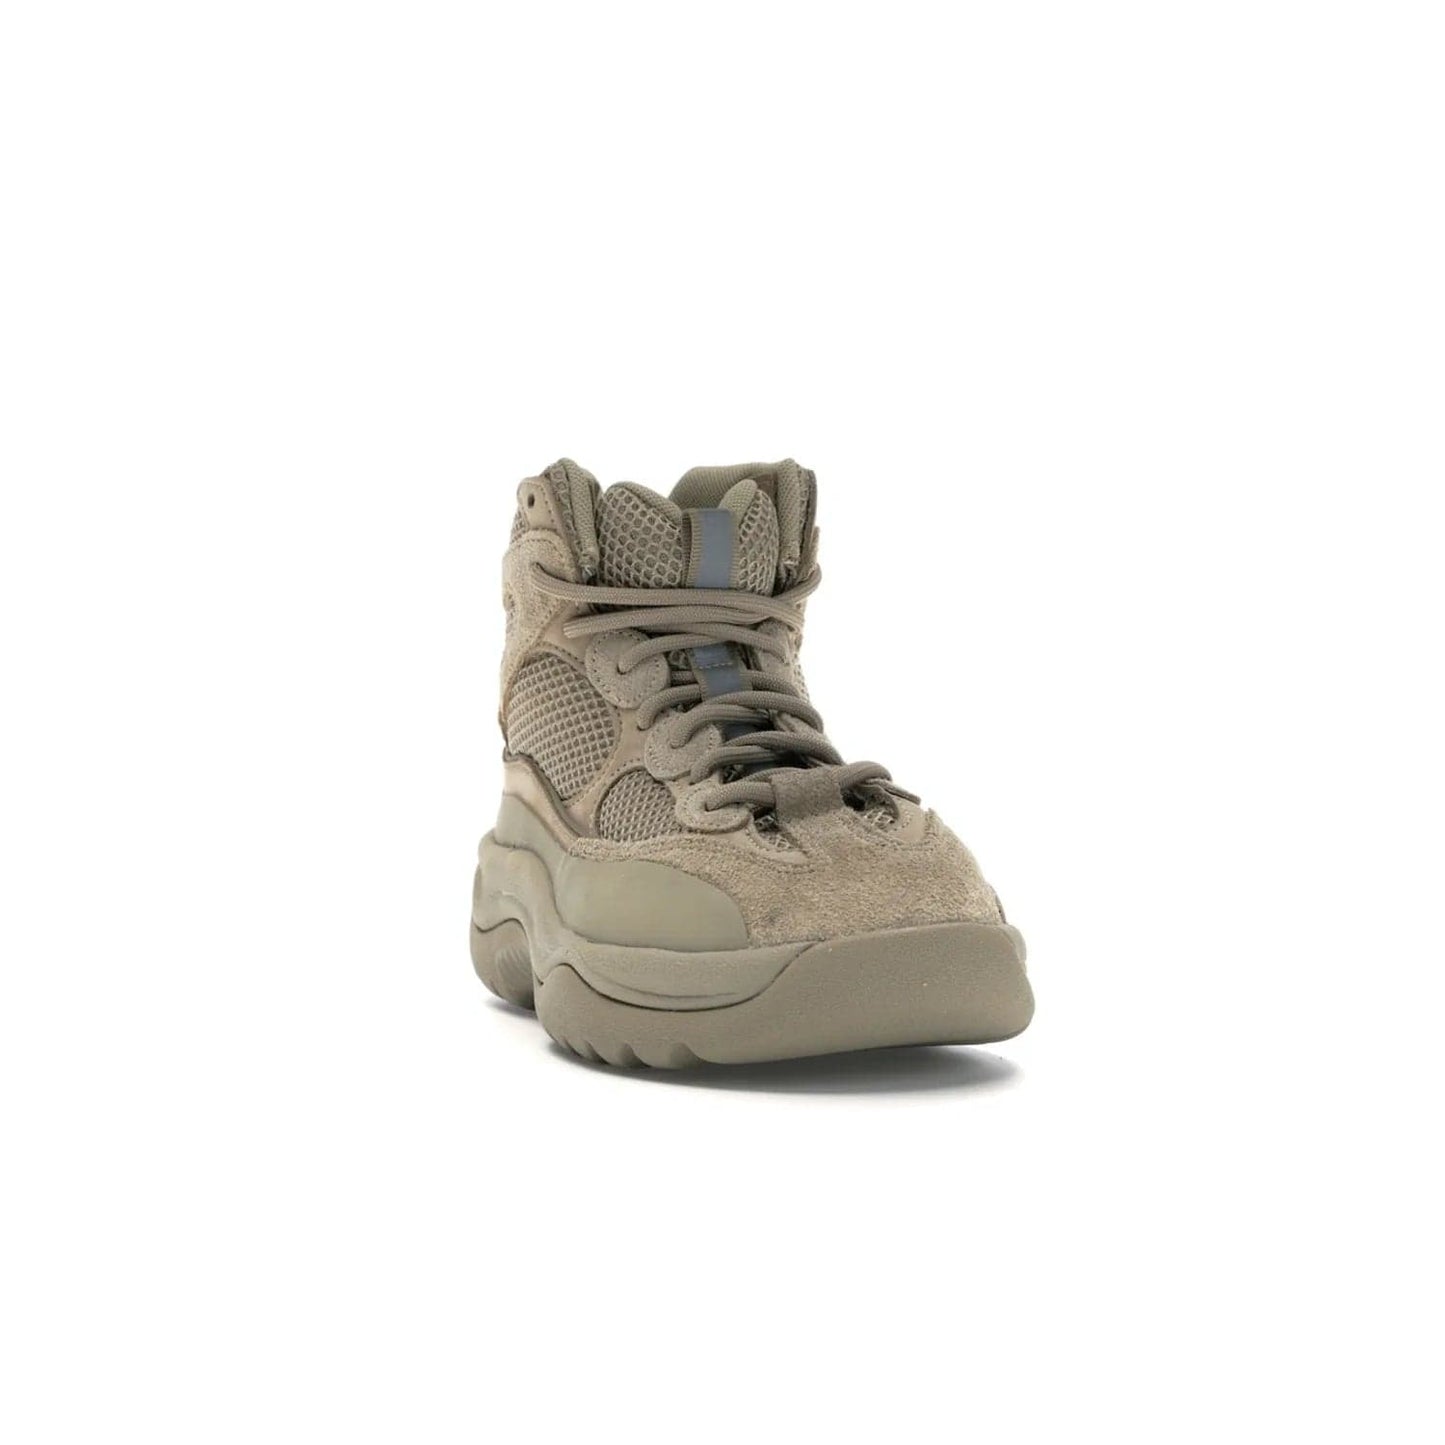 adidas Yeezy Desert Boot Rock - Image 8 - Only at www.BallersClubKickz.com - #
This season, make a fashion statement with the adidas Yeezy Desert Boot Rock. Nubuck and suede upper offers tonal style while the grooved sole provides traction and stability. Get yours in April 2019.